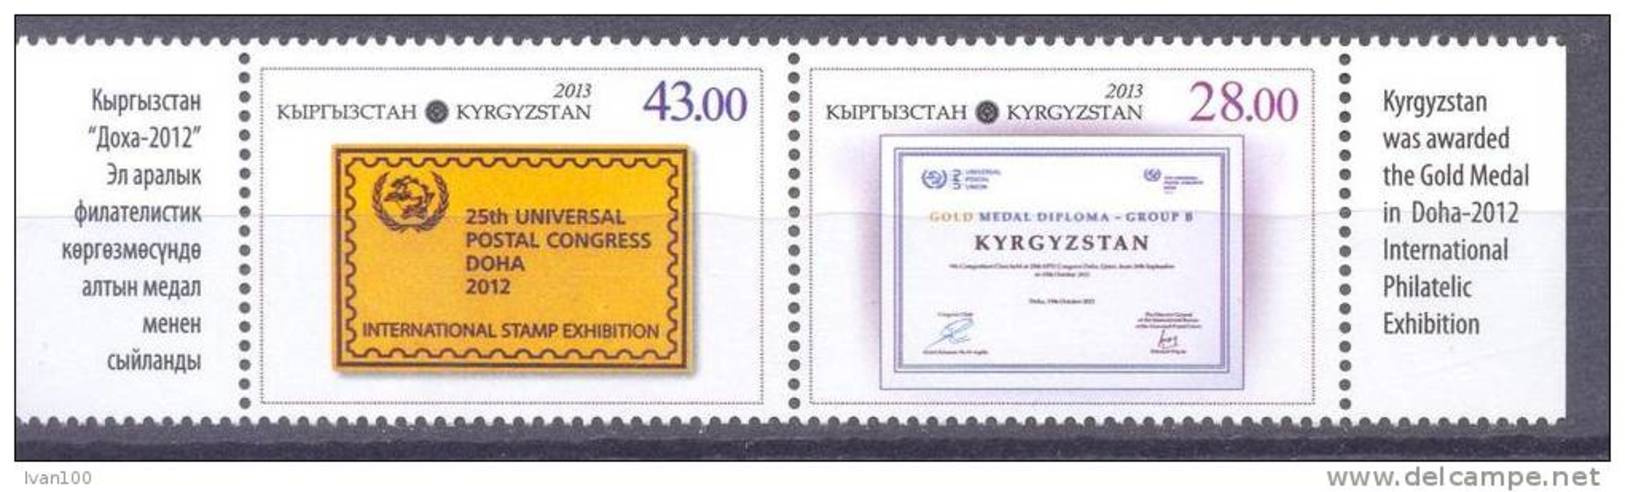 2013. The Award Of Kyrgyzstan On International Philatelic Exhibition, 2v Perforated,  Mint/** - Kyrgyzstan